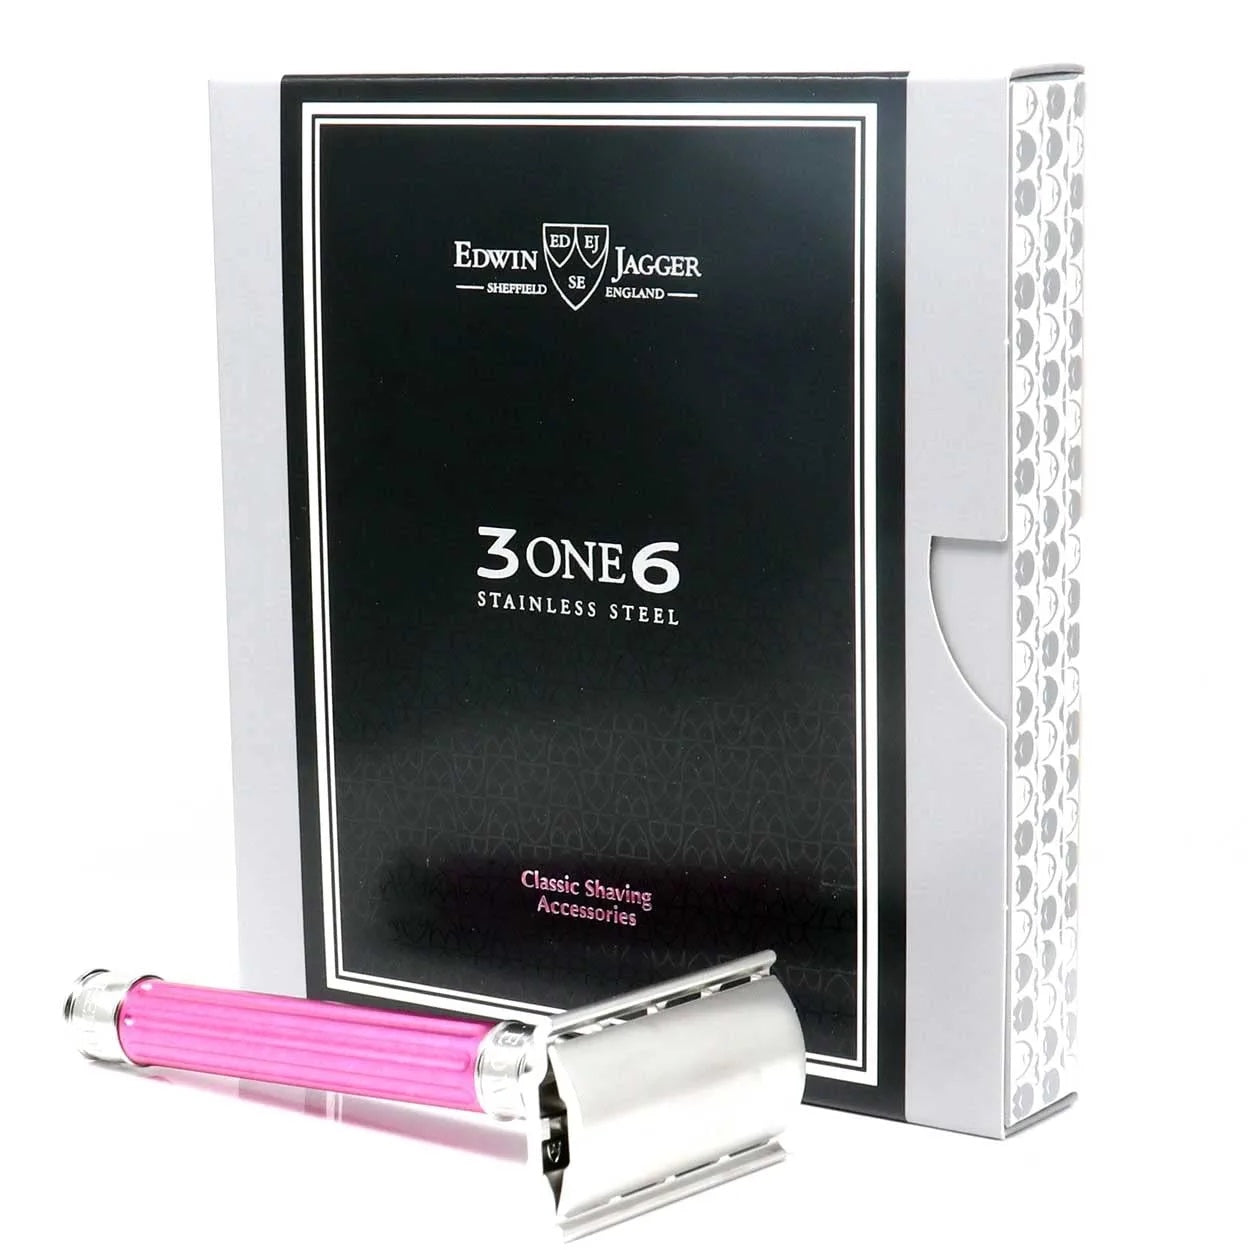 Edwin Jagger 3ONE6 DE Stainless Steel Safety Razor, Grooved, Anodised Pink, 1x Pack of Feather Razor